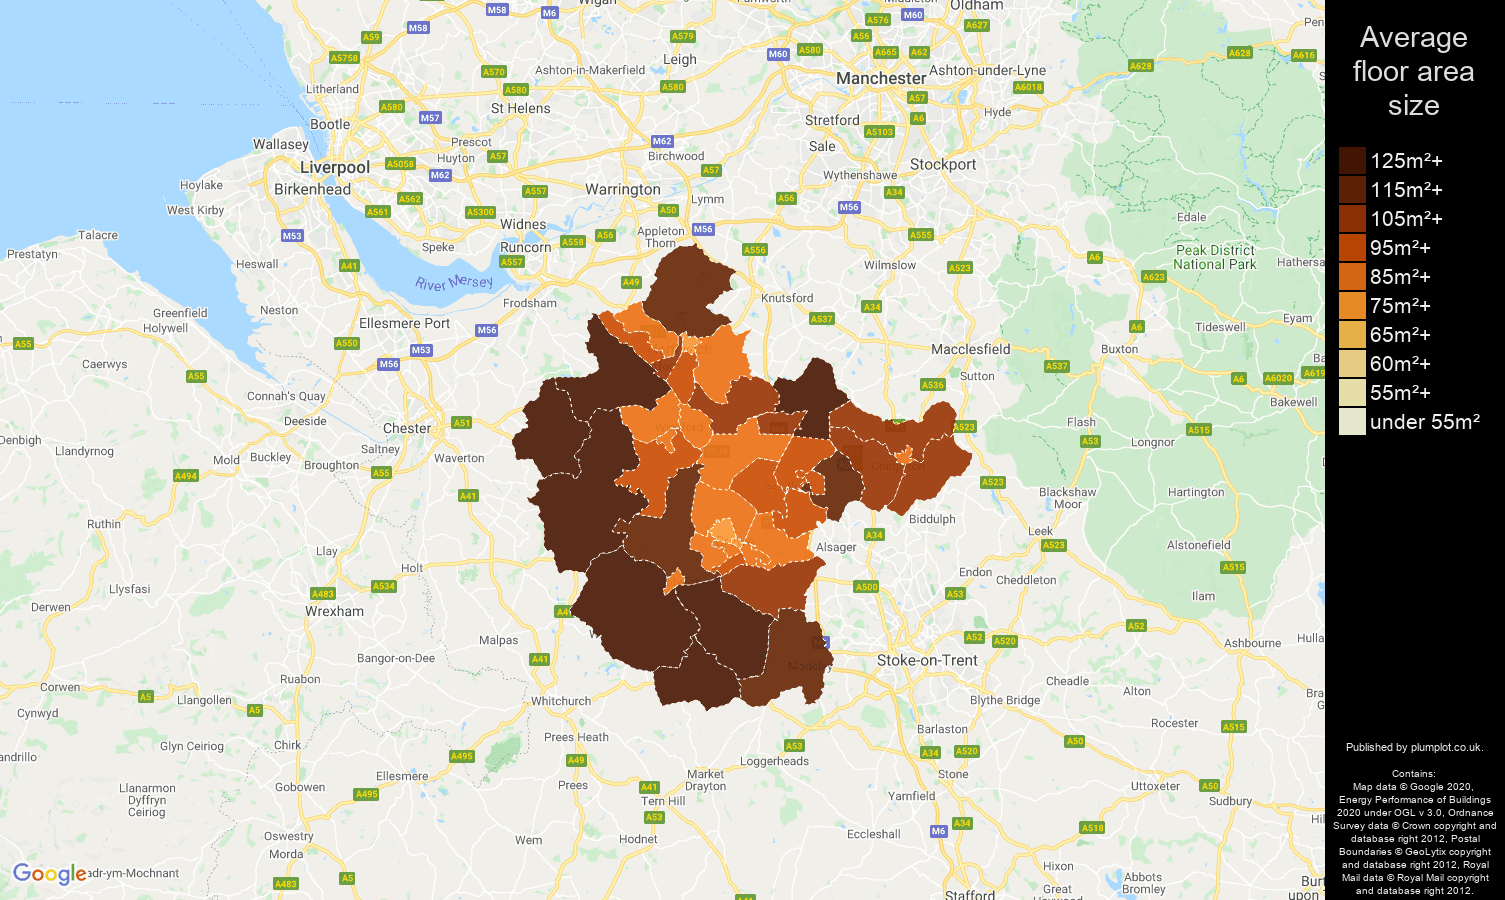 Crewe map of average floor area size of houses